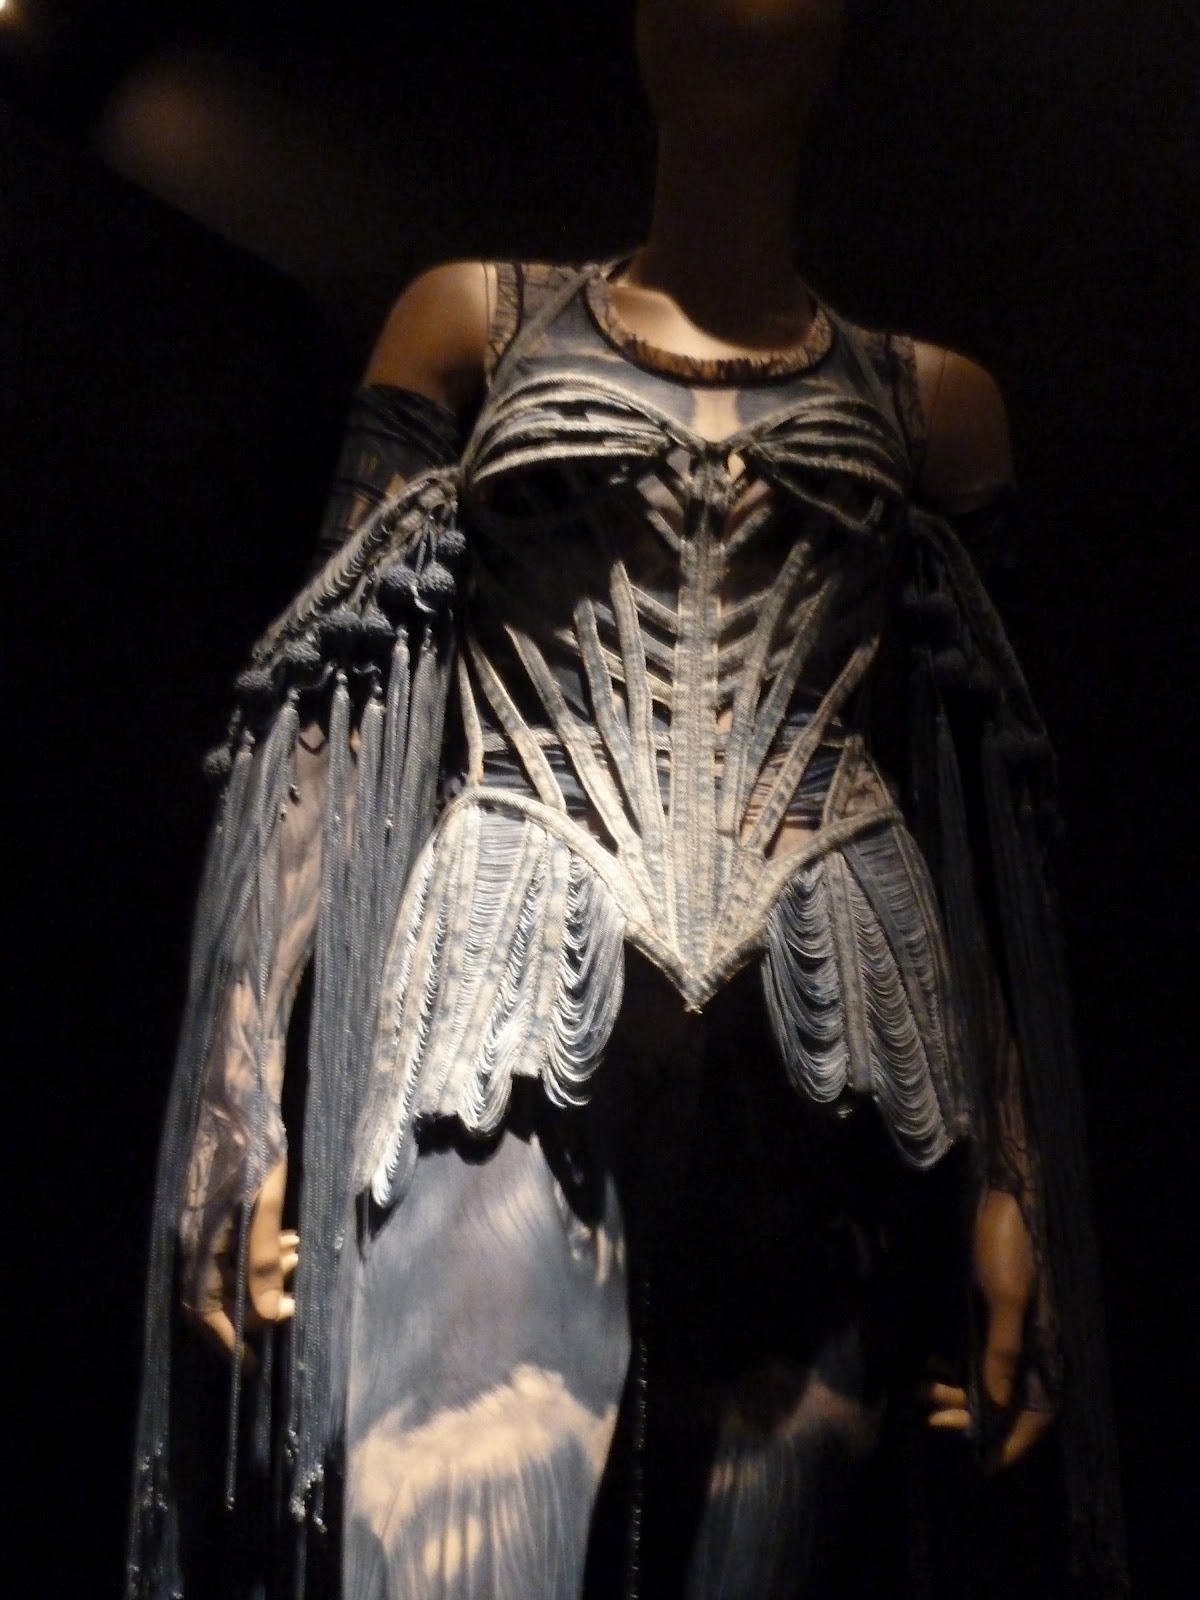 Culture Stains: Jean Paul Gaultier at the De Young